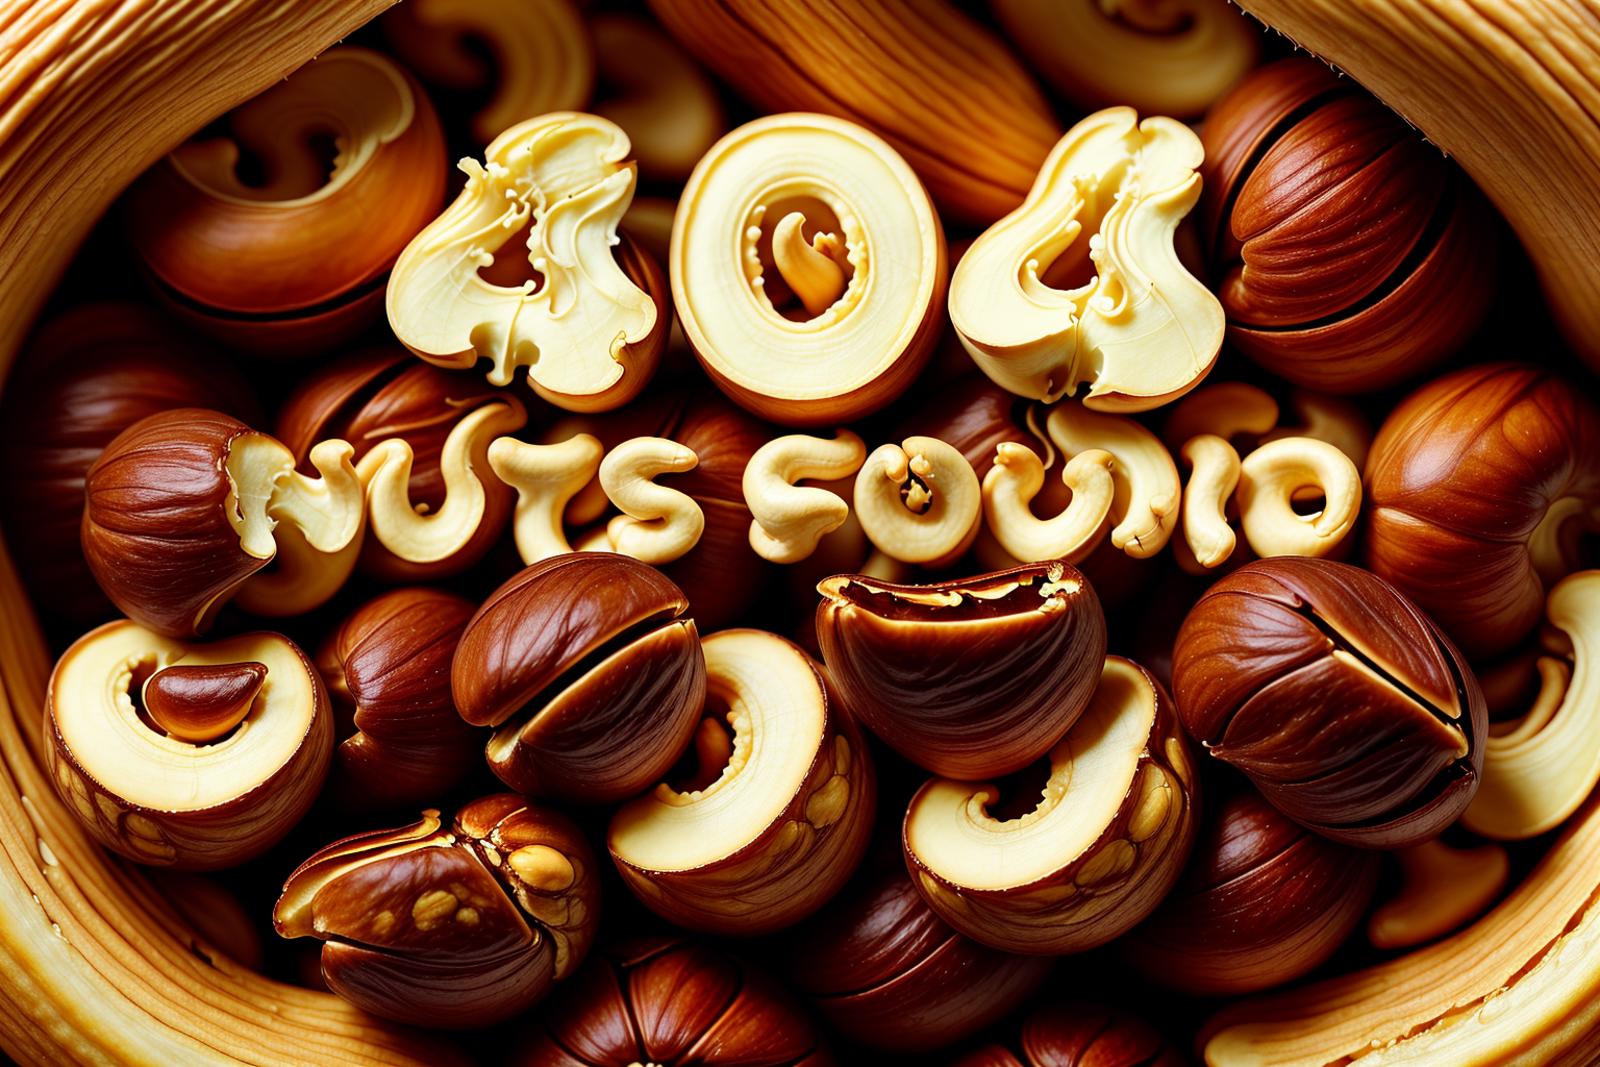 A close-up of a display of donuts and nuts, with the words "40 Nuts Found" written on the side.